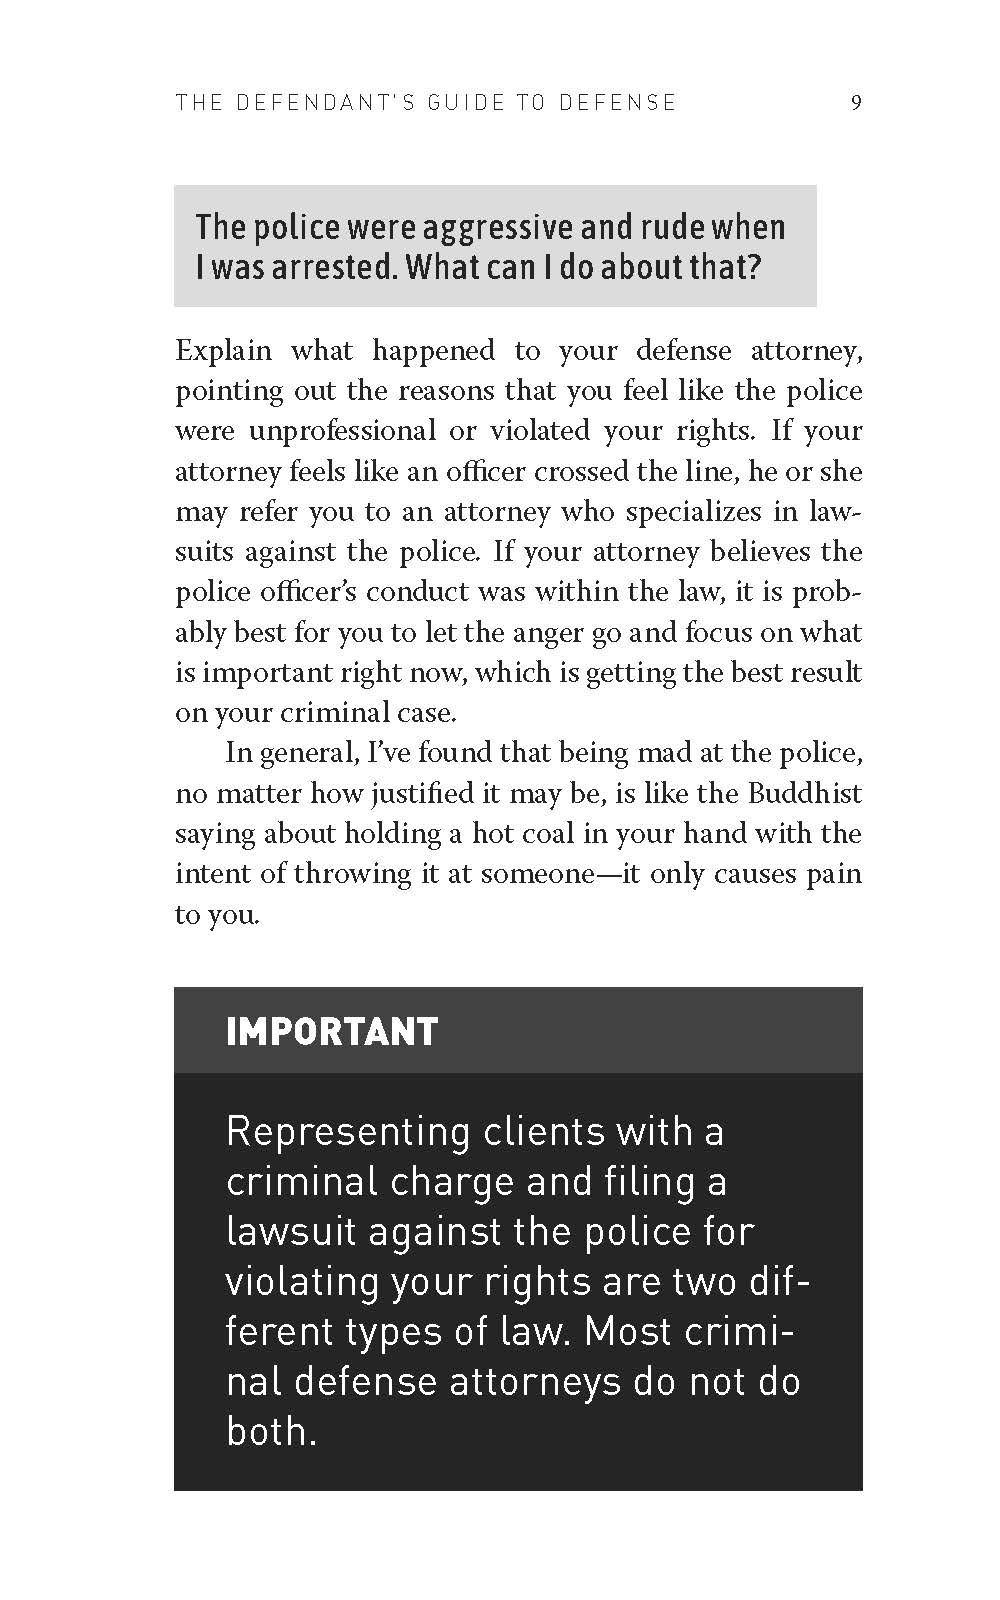 Sample_of_Defendant_s_Guide_to_Defense_Page_12.jpg